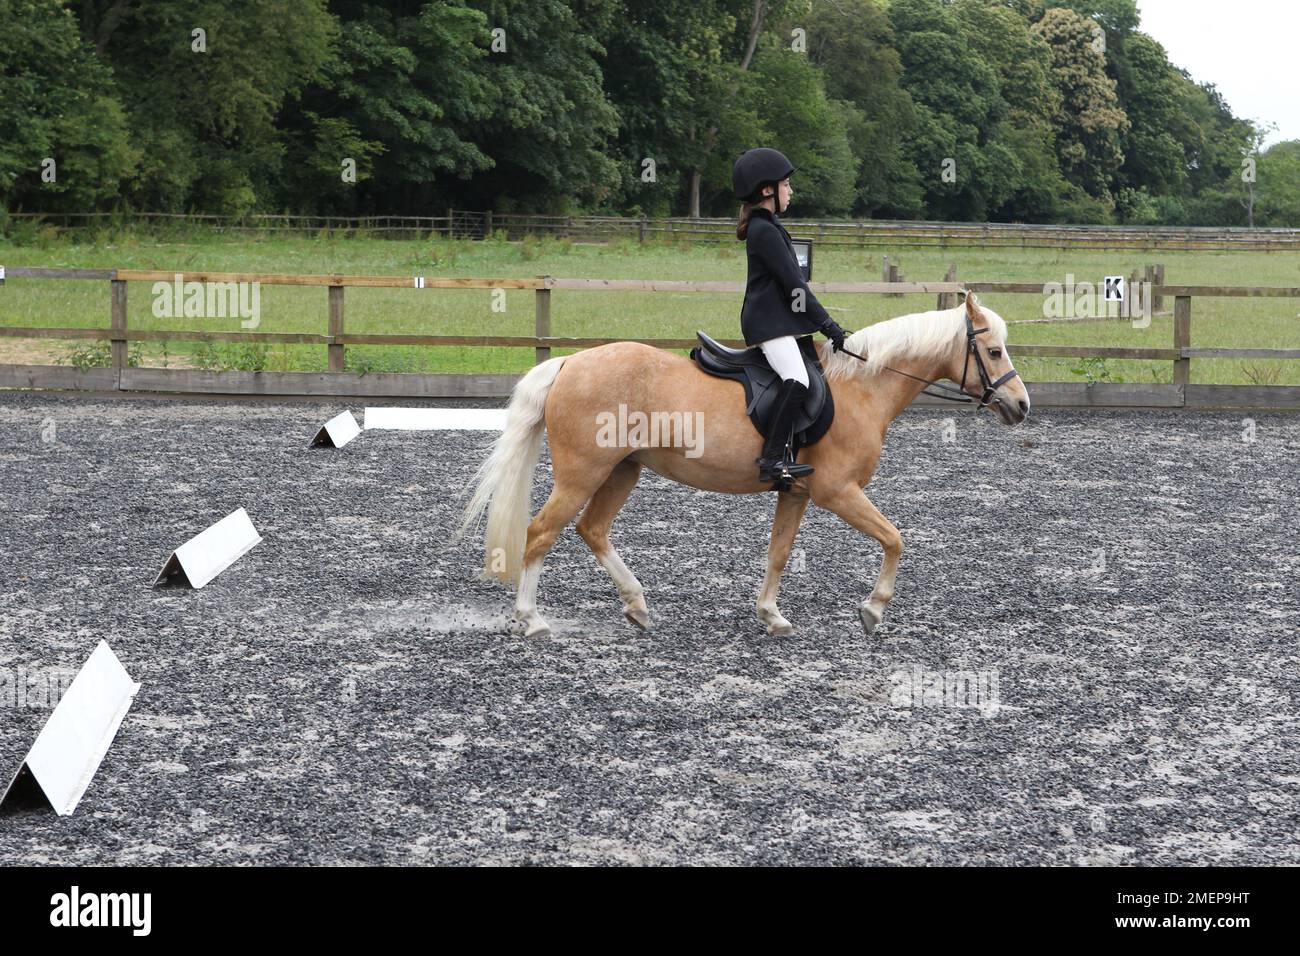 Girl riding palomino pony in paddock during dressage lesson, side view Stock Photo